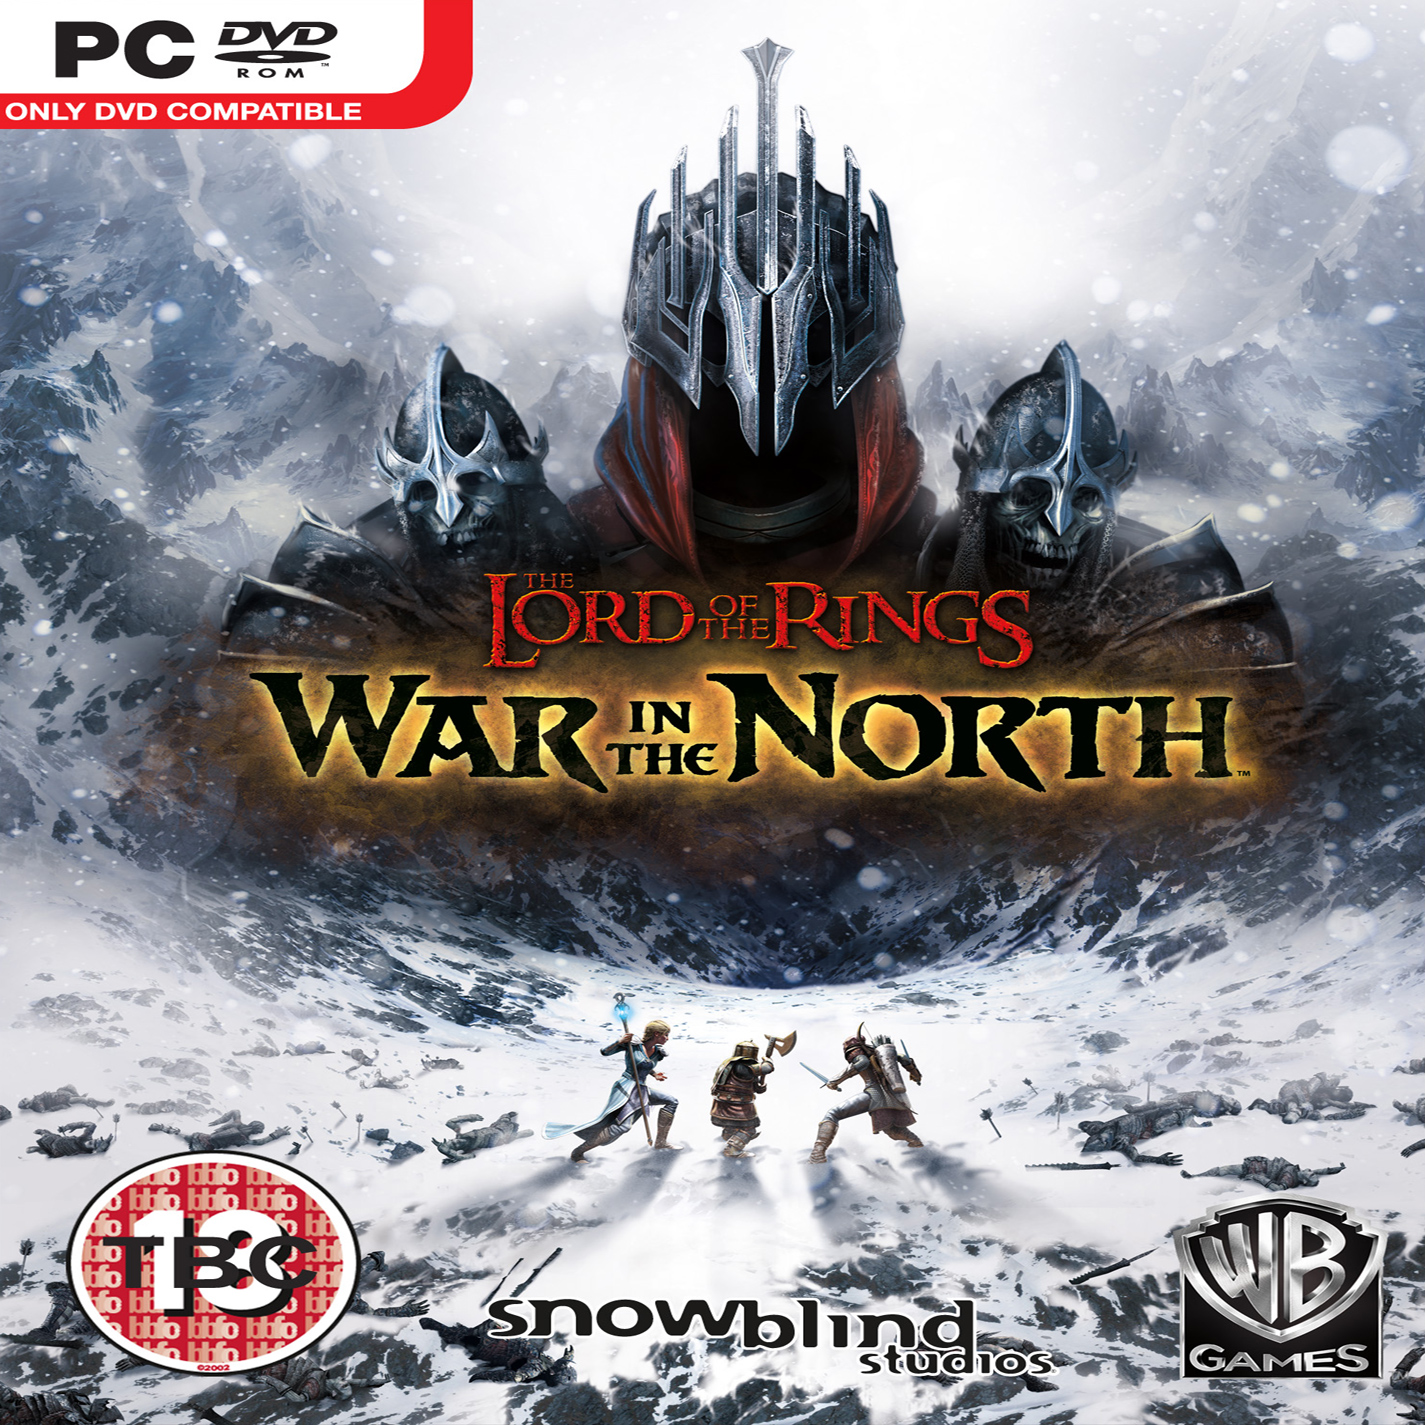 Lord of the rings war in the north купить steam фото 68